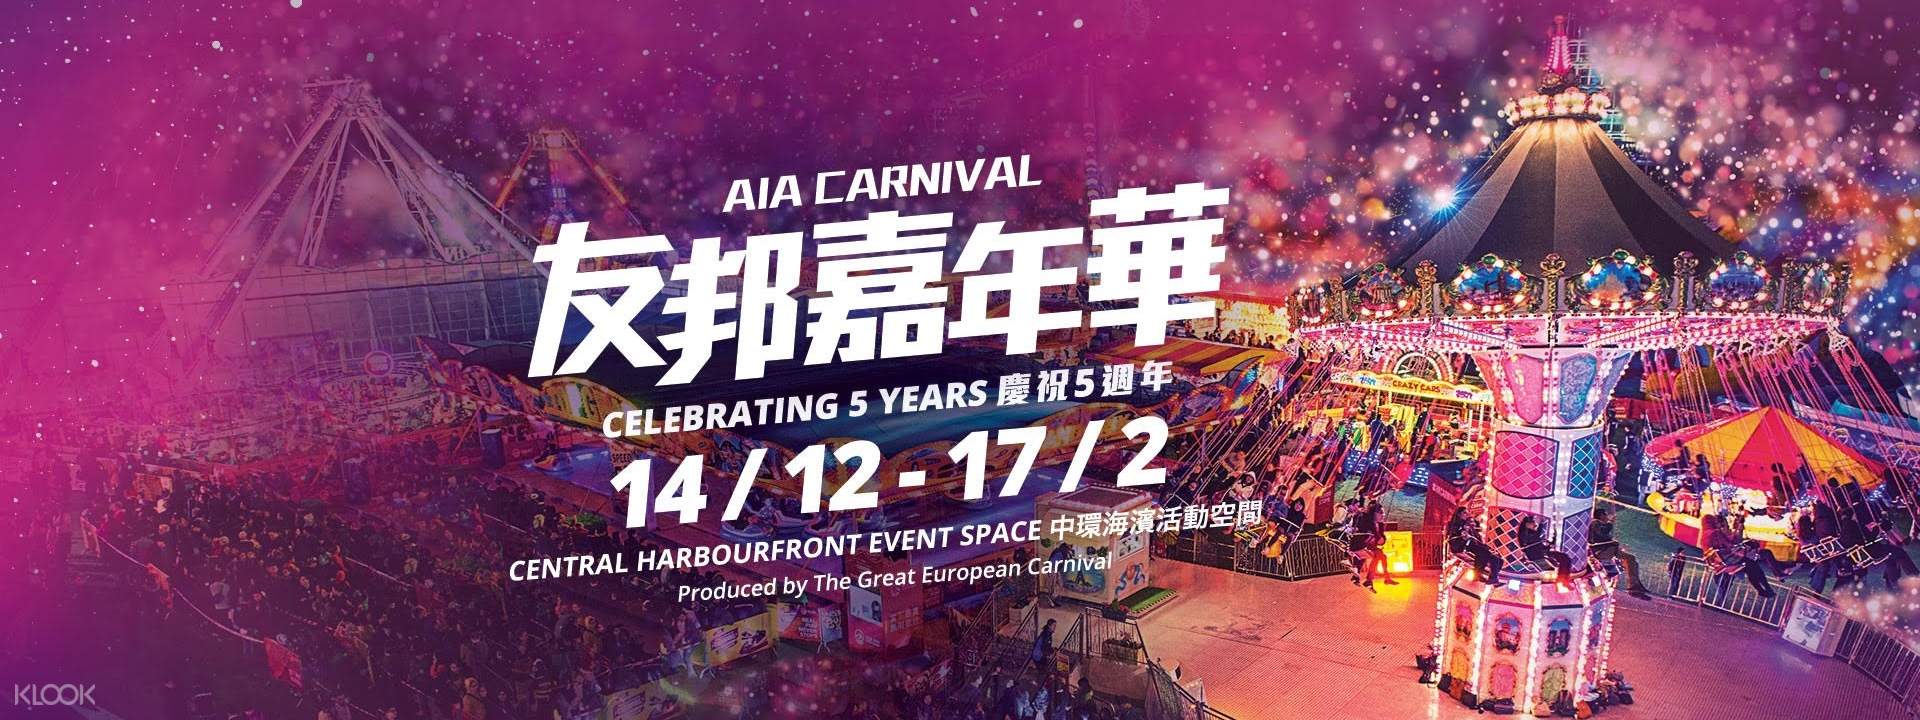 AIA Great European Carnival Tickets in Hong Kong